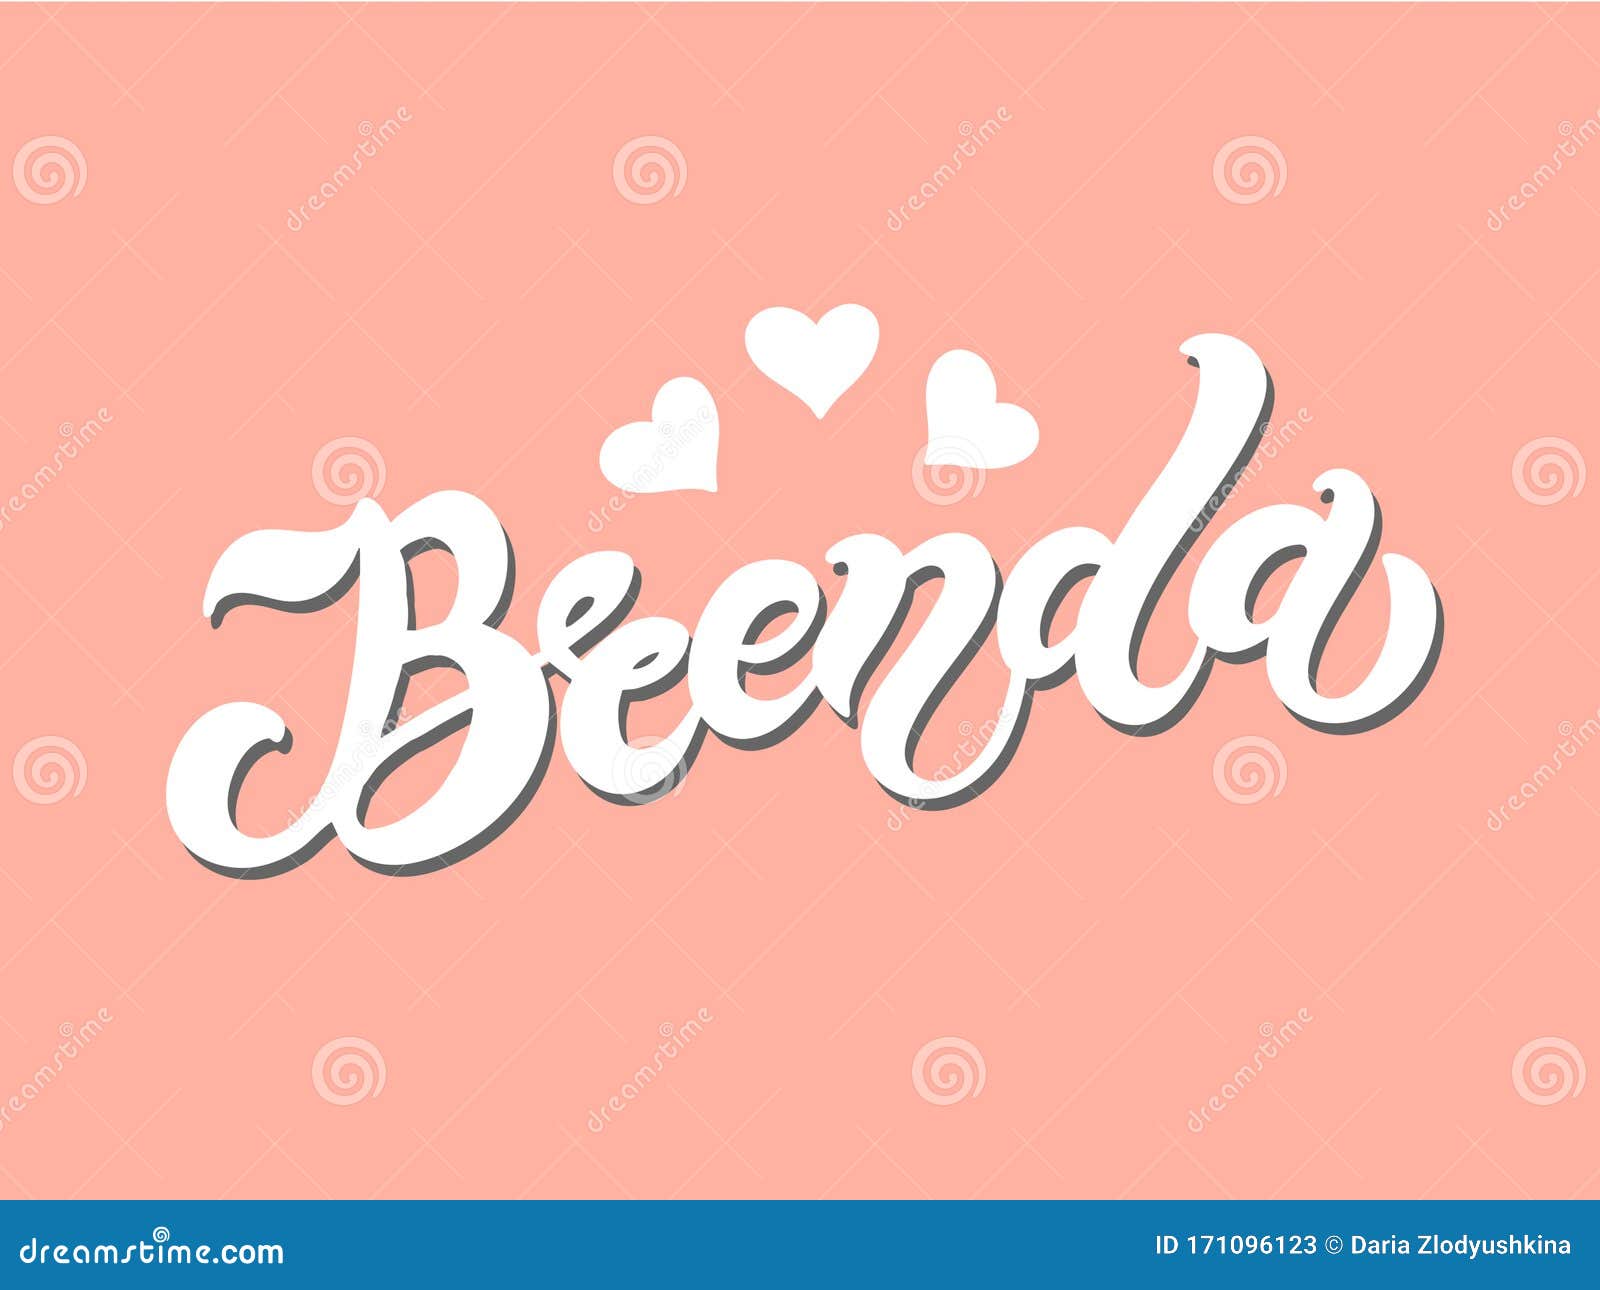 brenda. woman`s name. hand drawn lettering